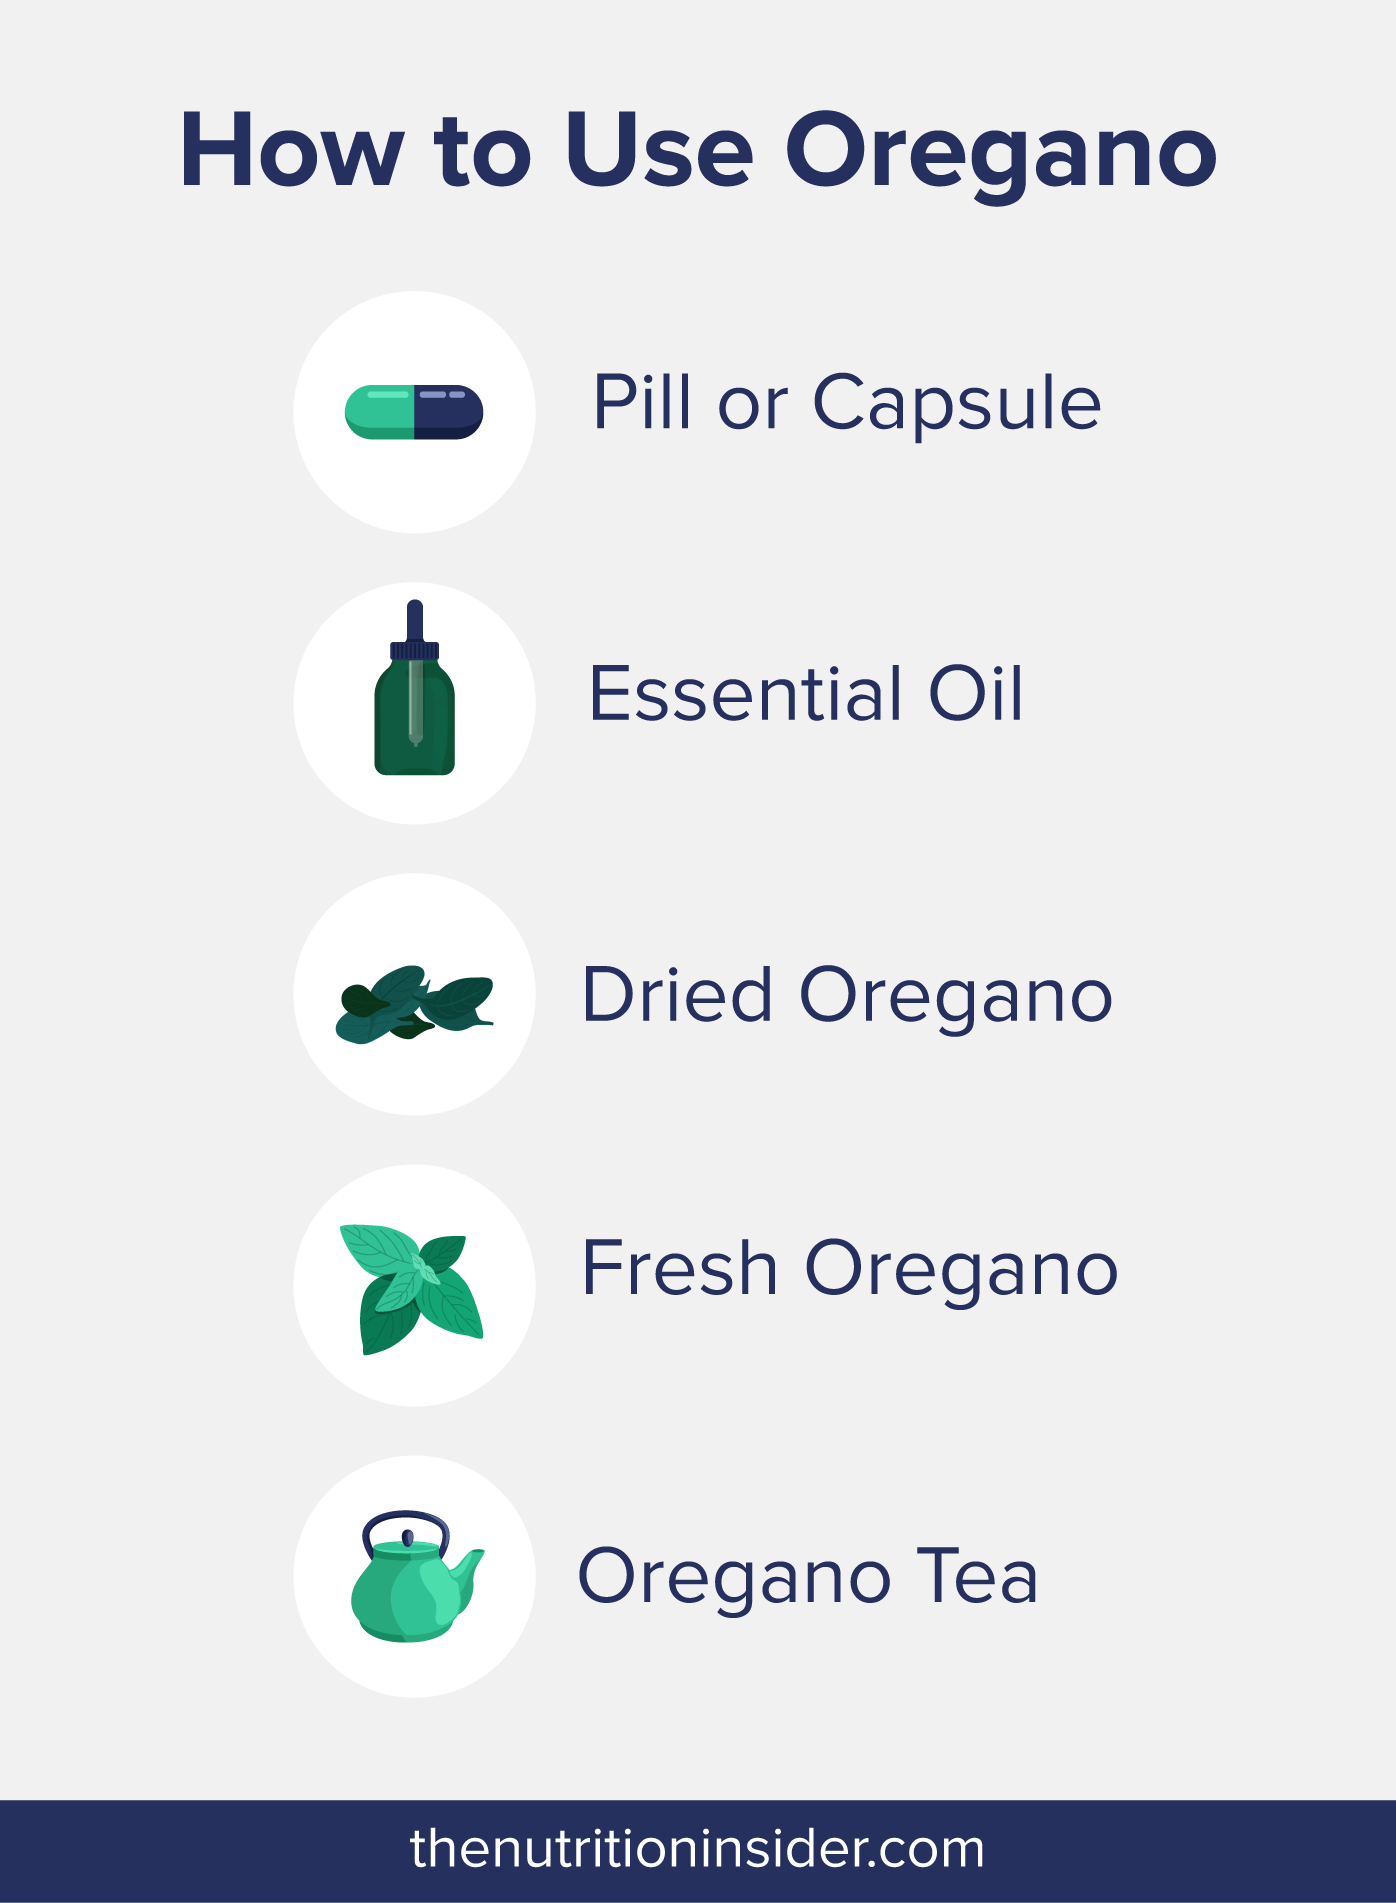 A graphic entitled "How to Use Oregano" with various forms of oregano listed with corresponding images, such as "pill or capsule," "essential oil," and "dried oregano." 